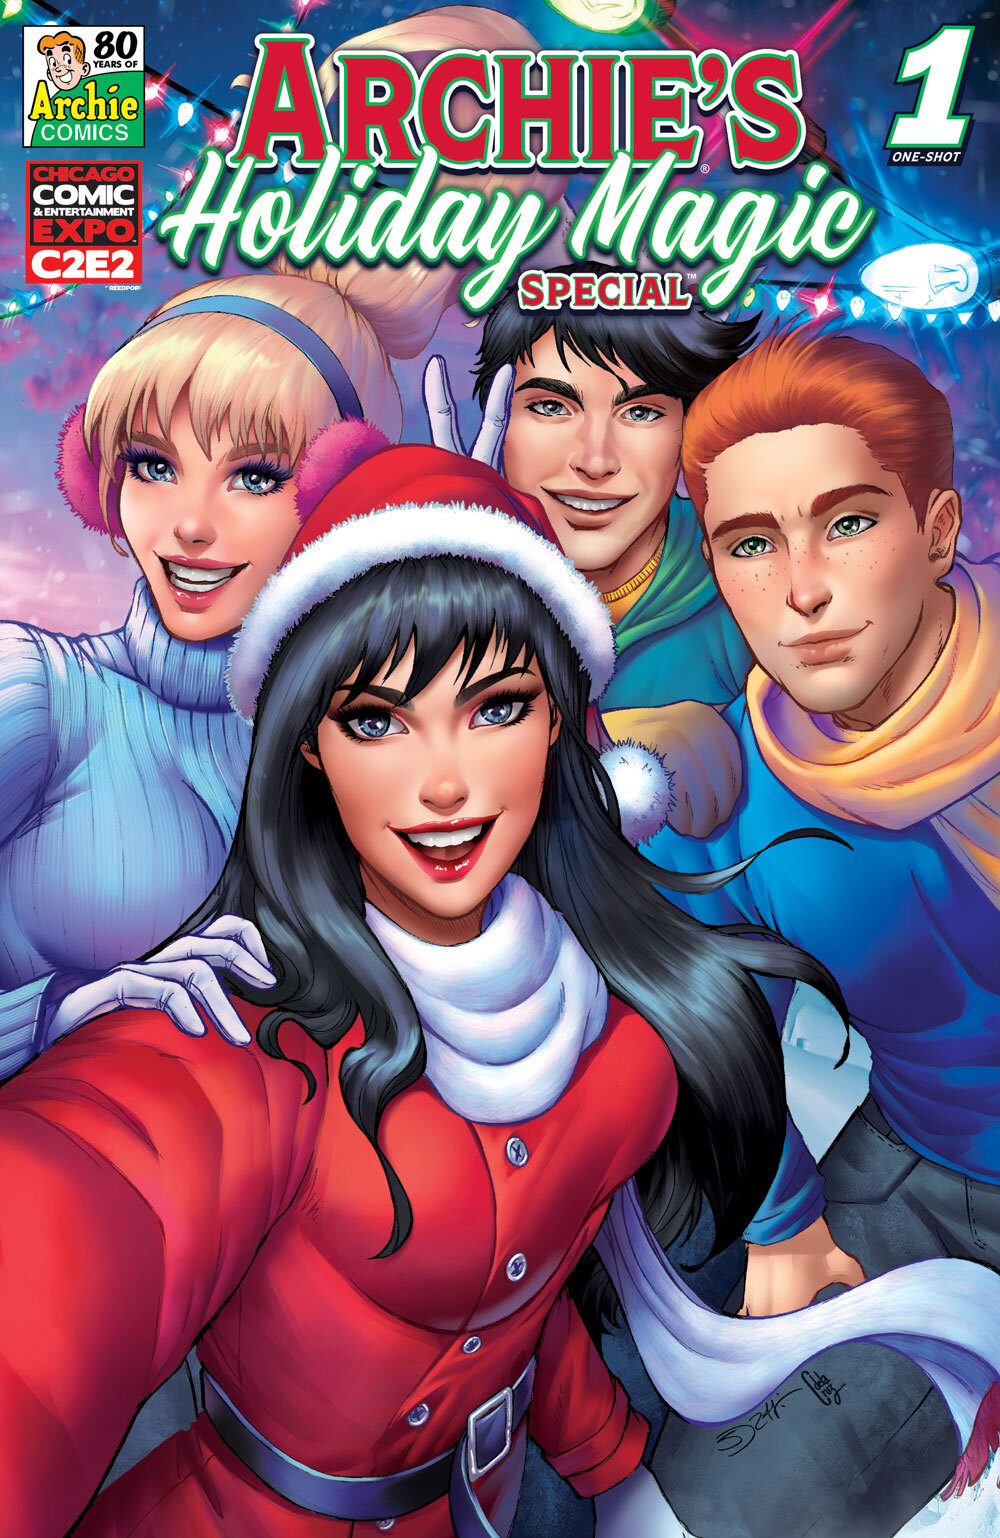 Archie's Holiday Magic Special #1 A Cover Archie Comics 2021 VF/NM